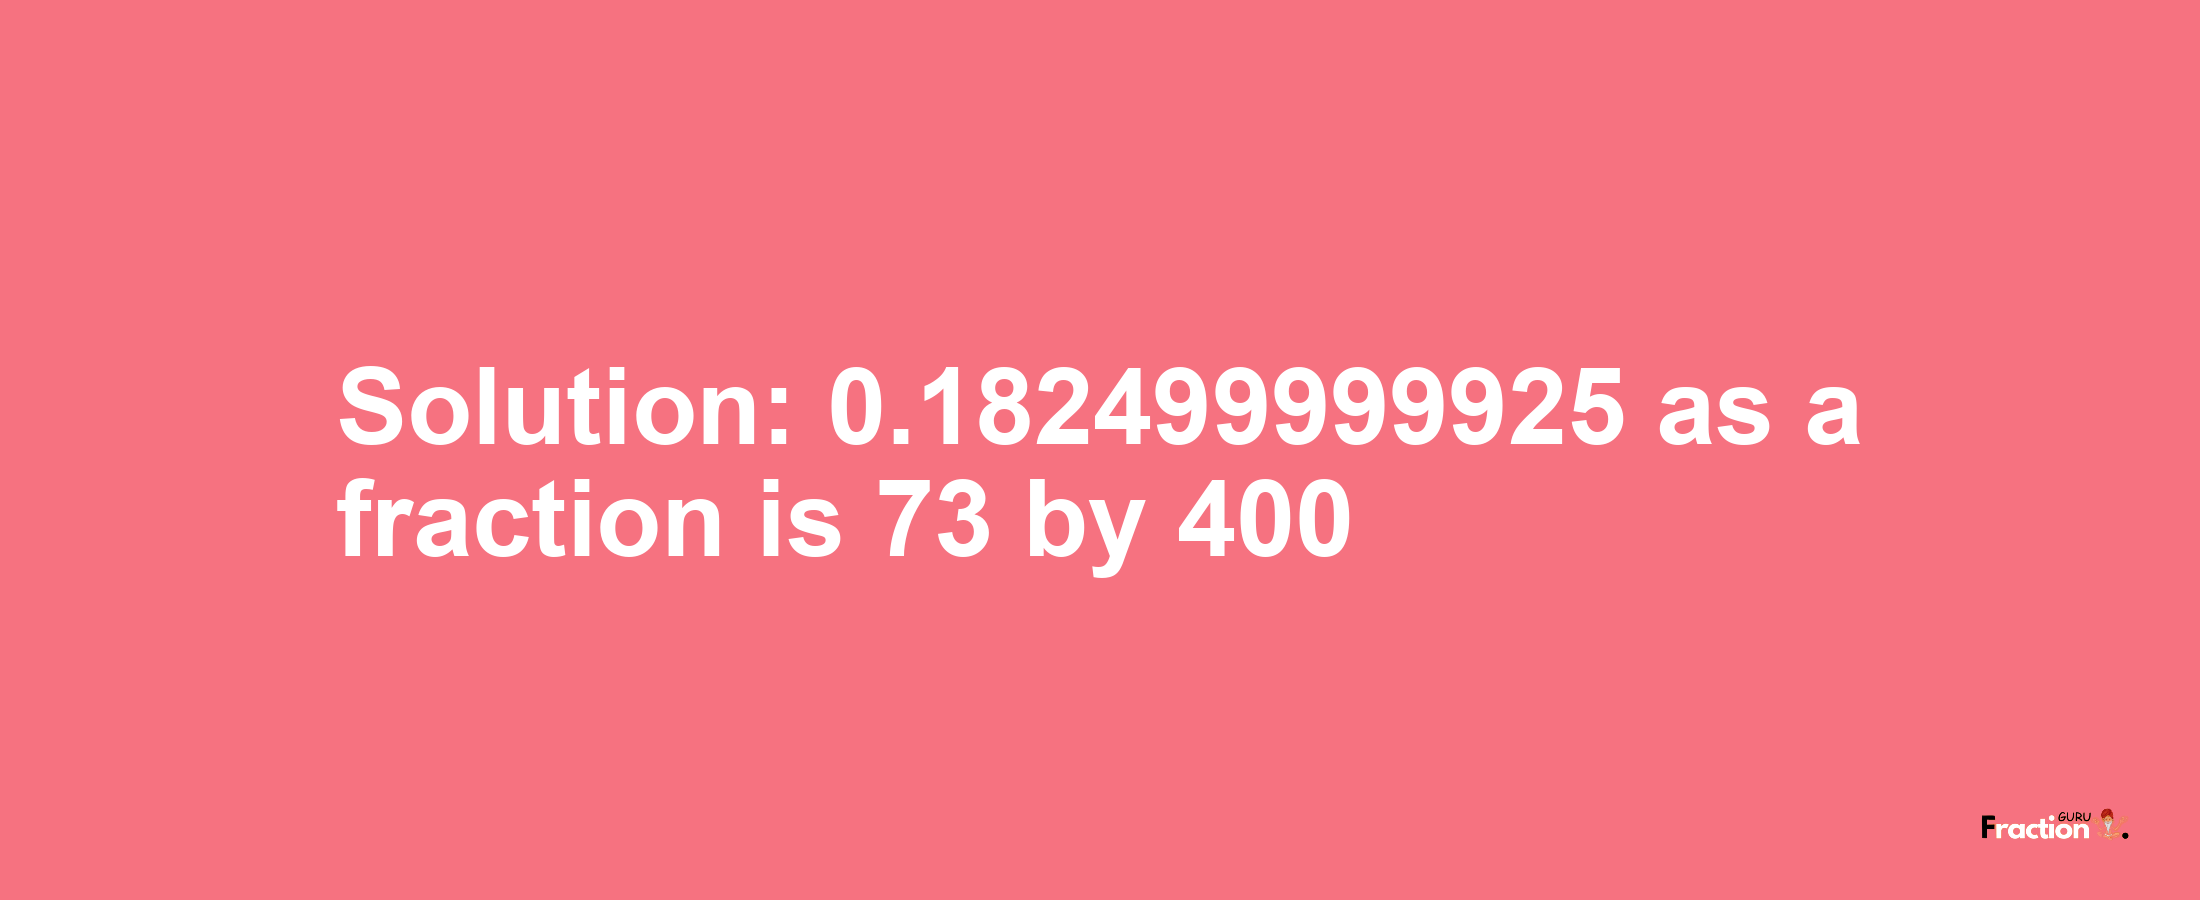 Solution:0.182499999925 as a fraction is 73/400